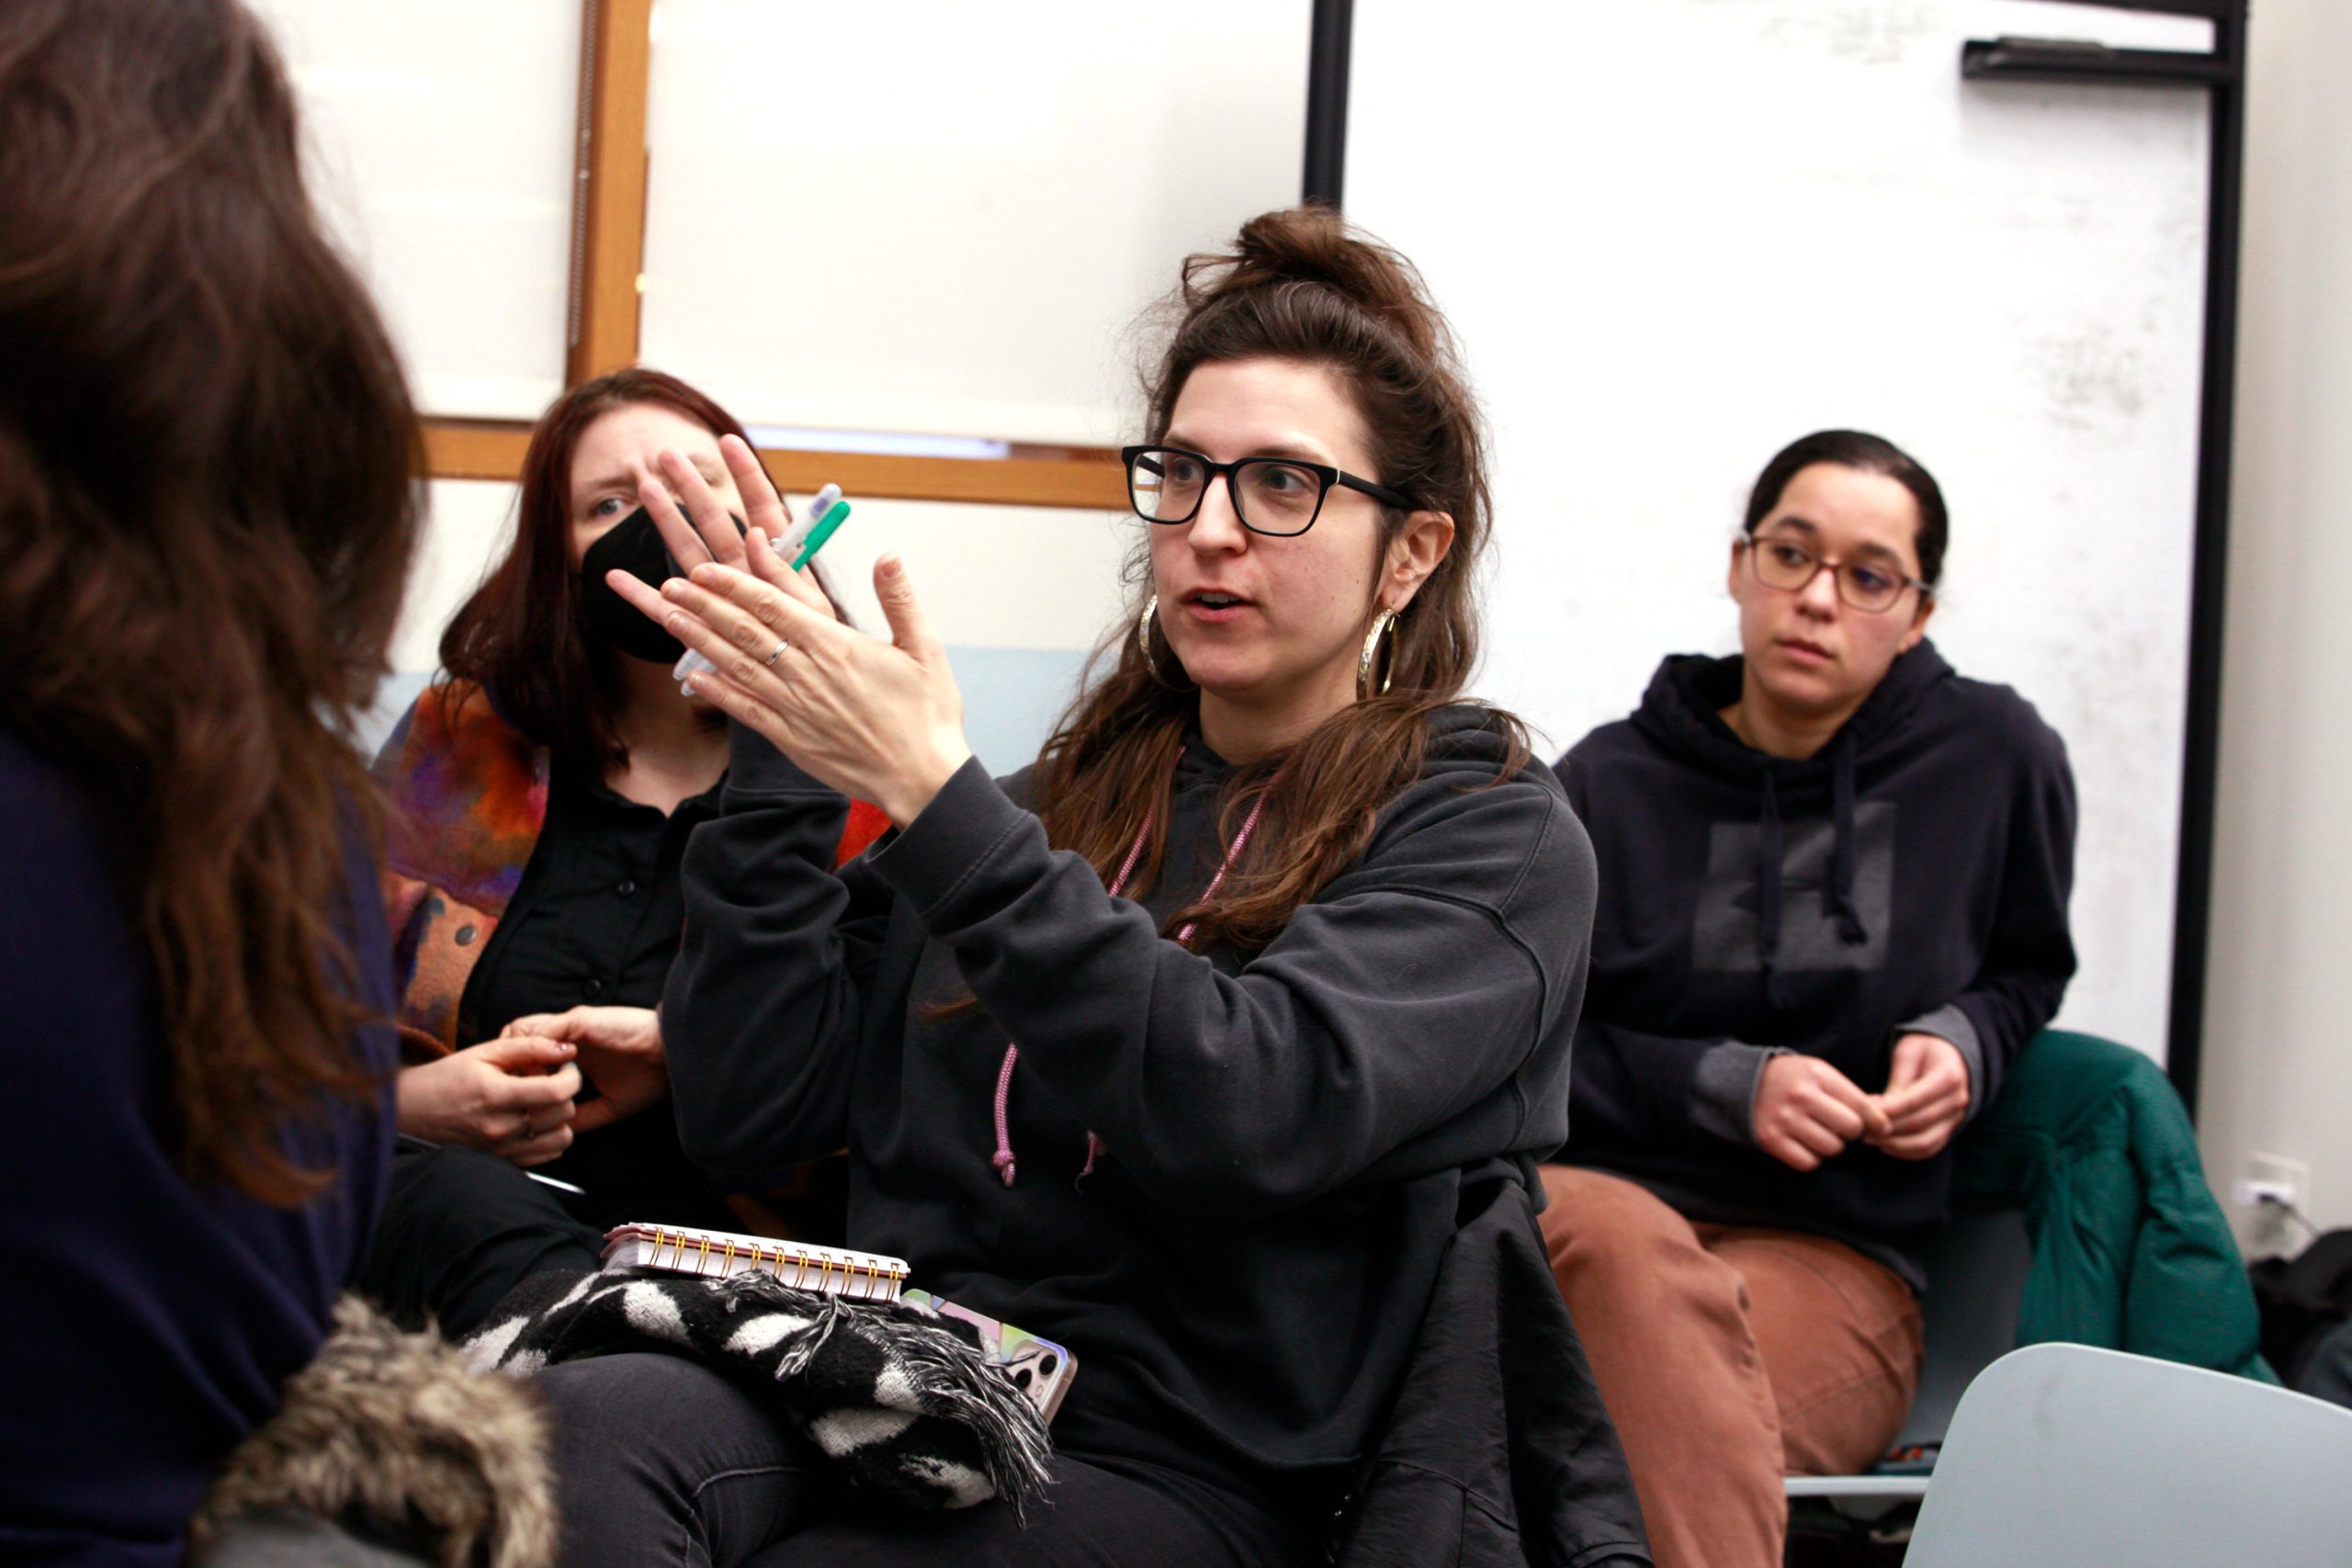 Three women sit inside a library room as one speaks and gestures with her hands.